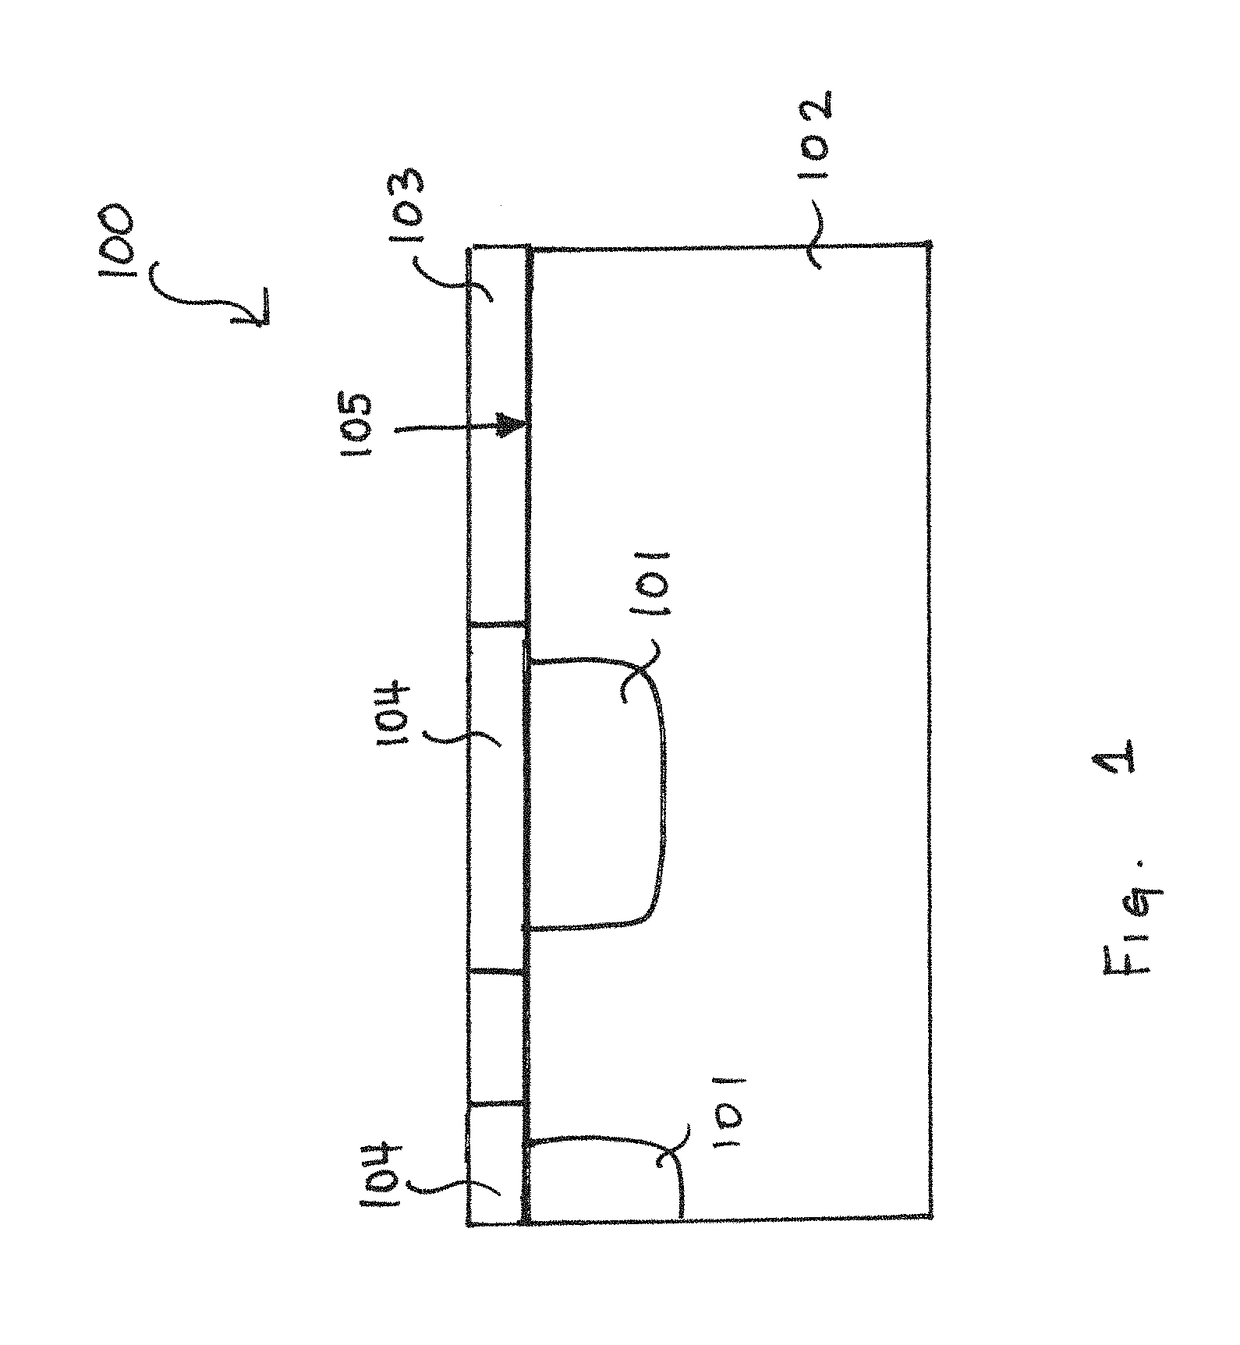 Semiconductor devices, a semiconductor diode and a method for forming a semiconductor device